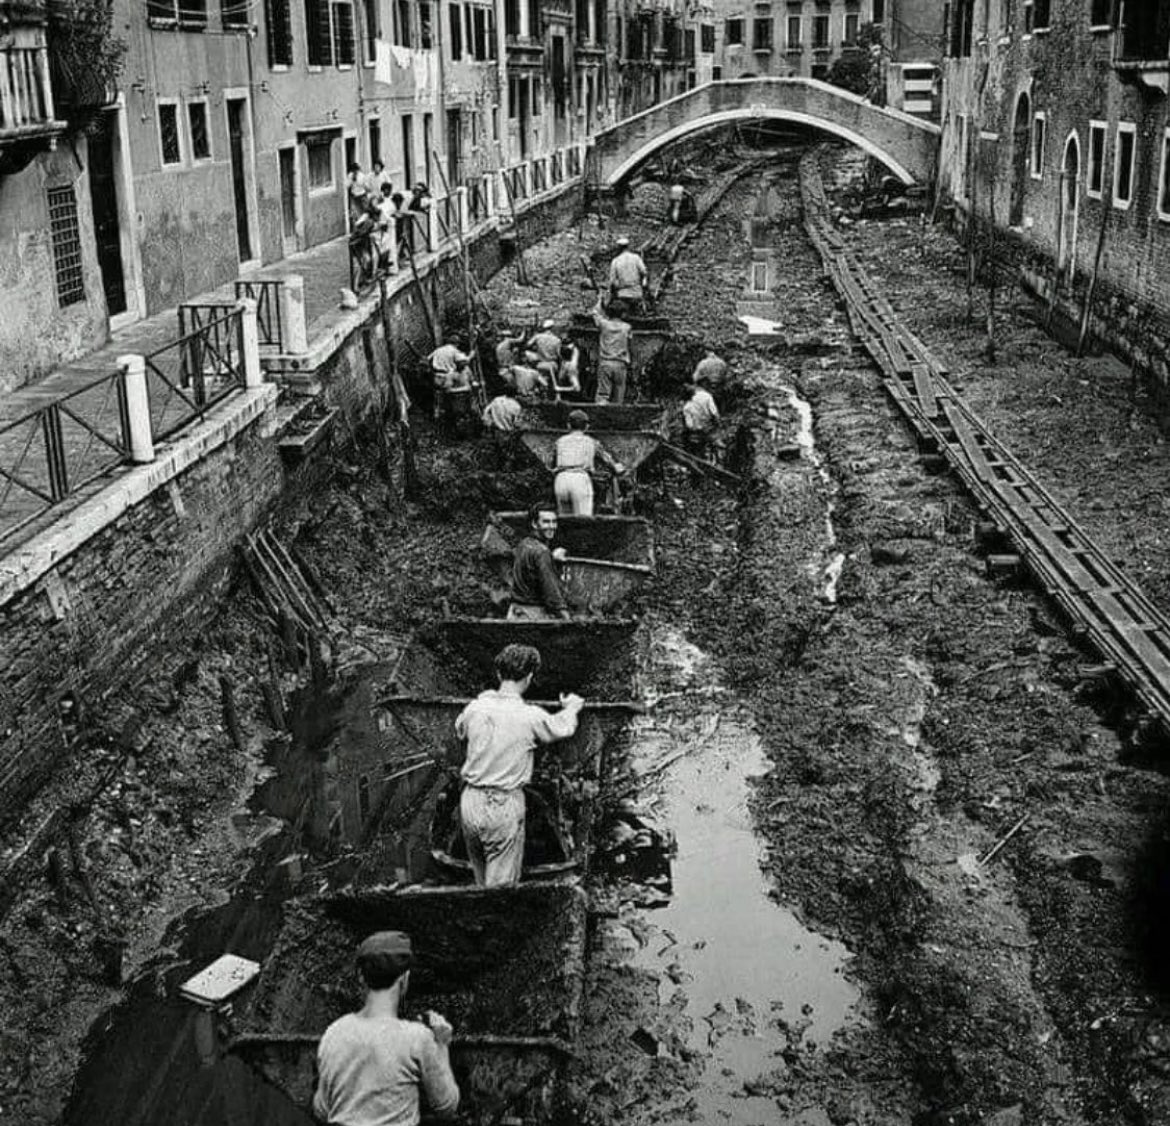 In 1956, Venice drained and cleaned its famous canals to combat flooding and deterioration. Workers removed centuries of sediment, uncovering hidden treasures. This effort symbolized Venetian resilience and remains a testament to their commitment to protecting their city.